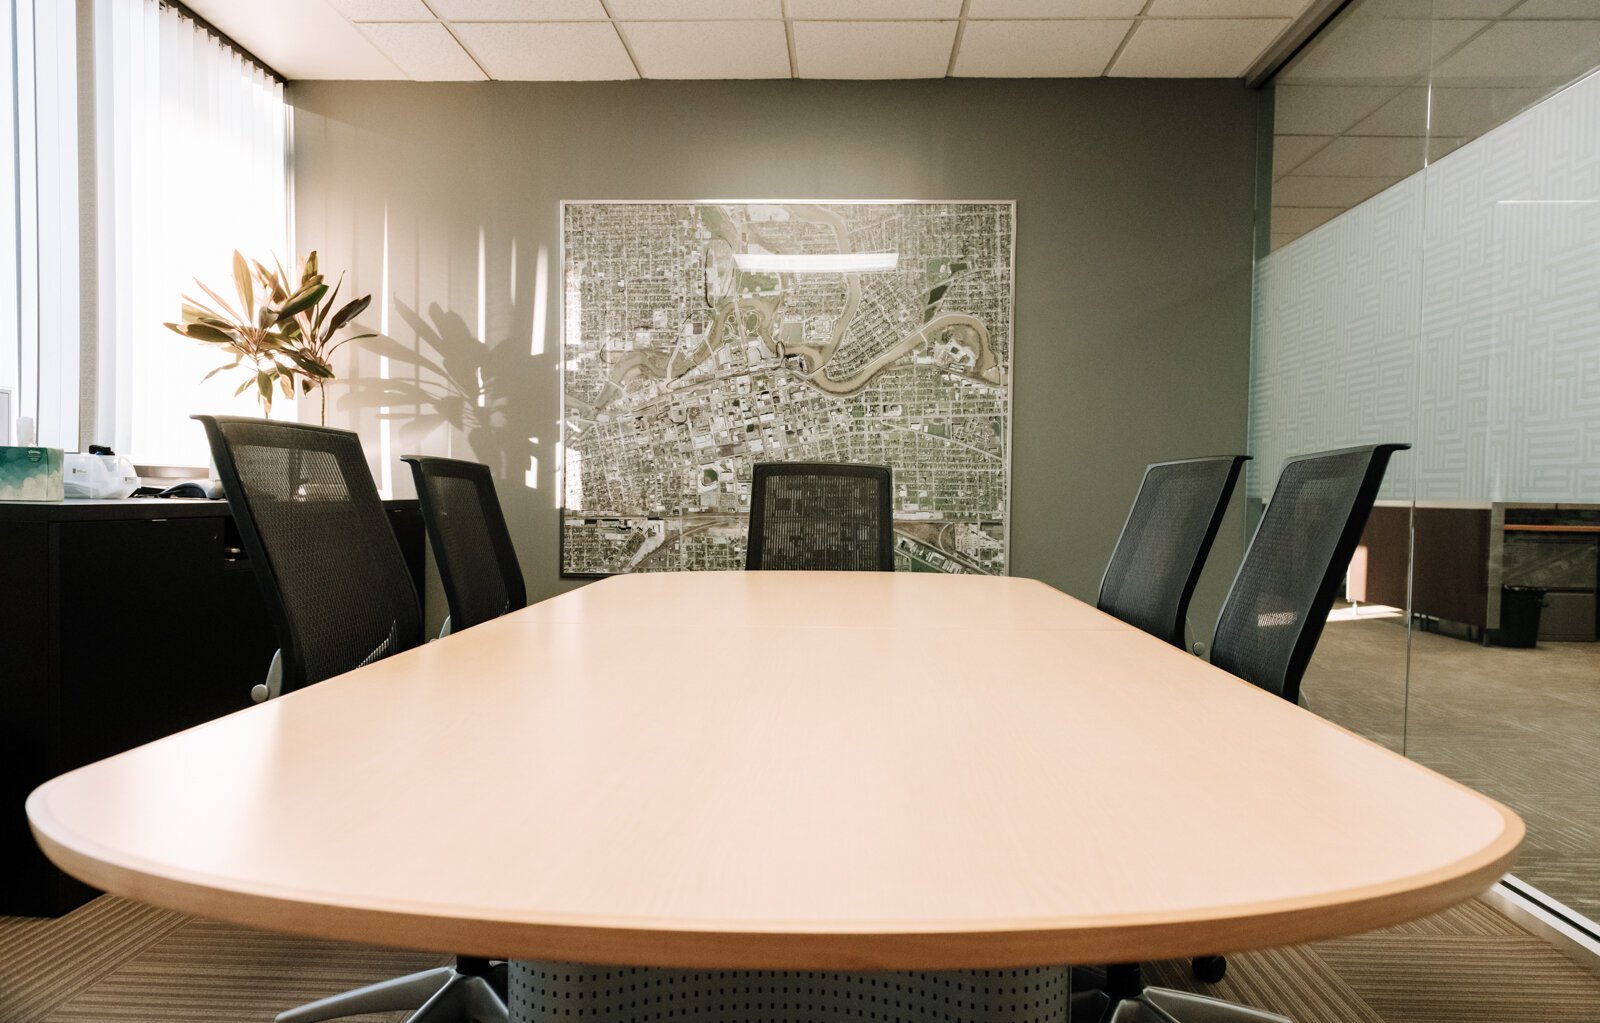 Conferences rooms at Greater Fort Wayne, Inc.